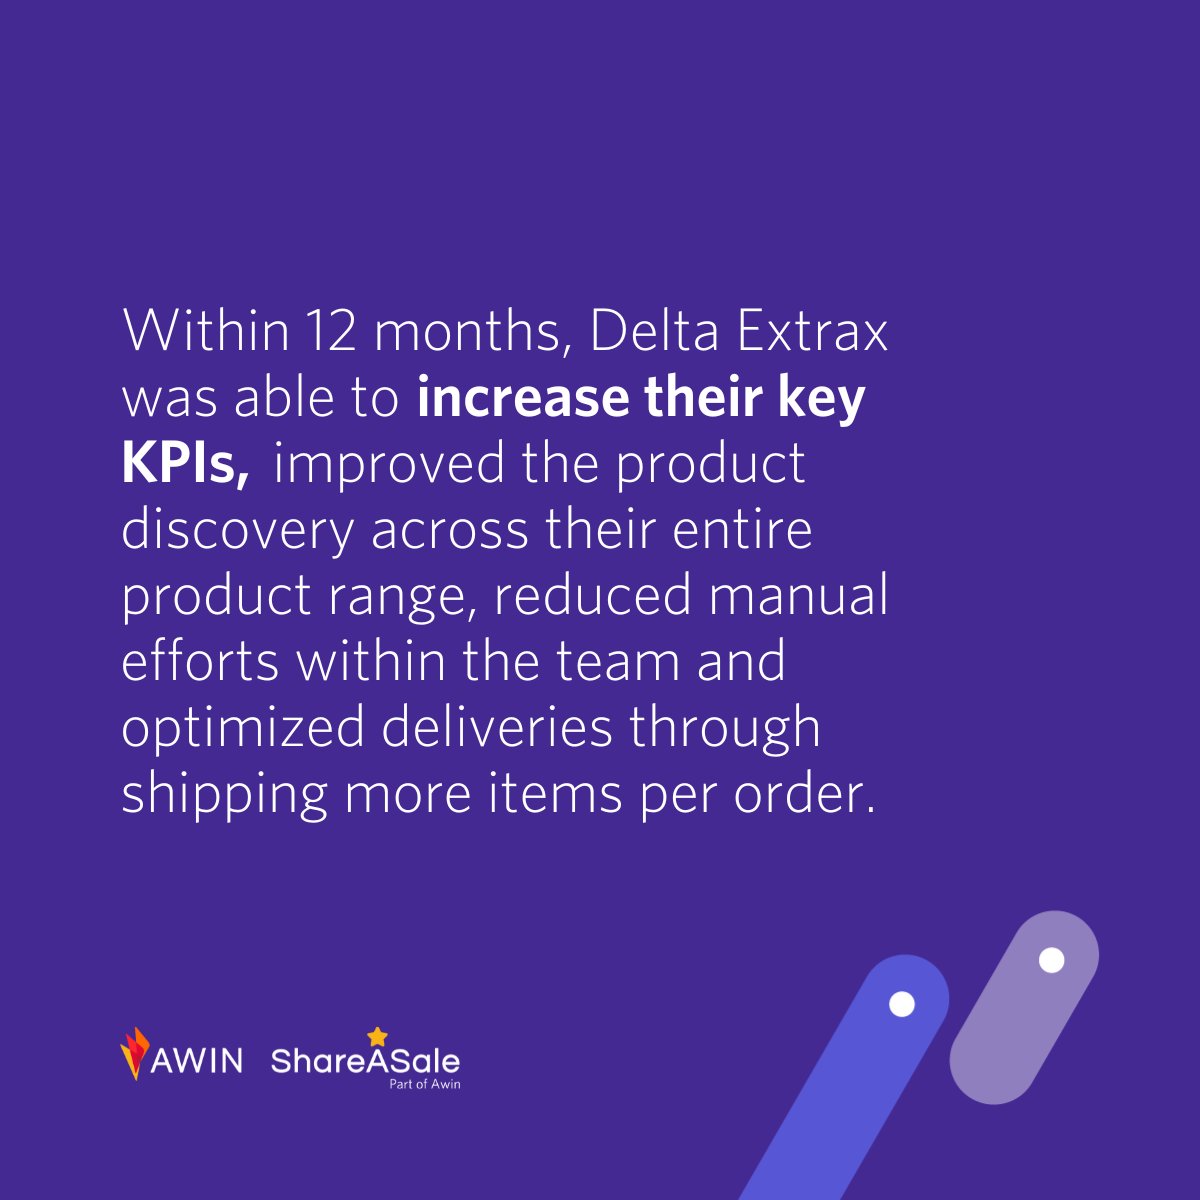 Looking to boost #AOV and drive incremental #sales?🚀 Explore how @ParticularAud leverages #AI based #automation and helped @DeltaExtrax achieve their goals by providing customers with the most relevant products and bundles based on their #buyingbehavior: ow.ly/MiuZ50Ri4pb